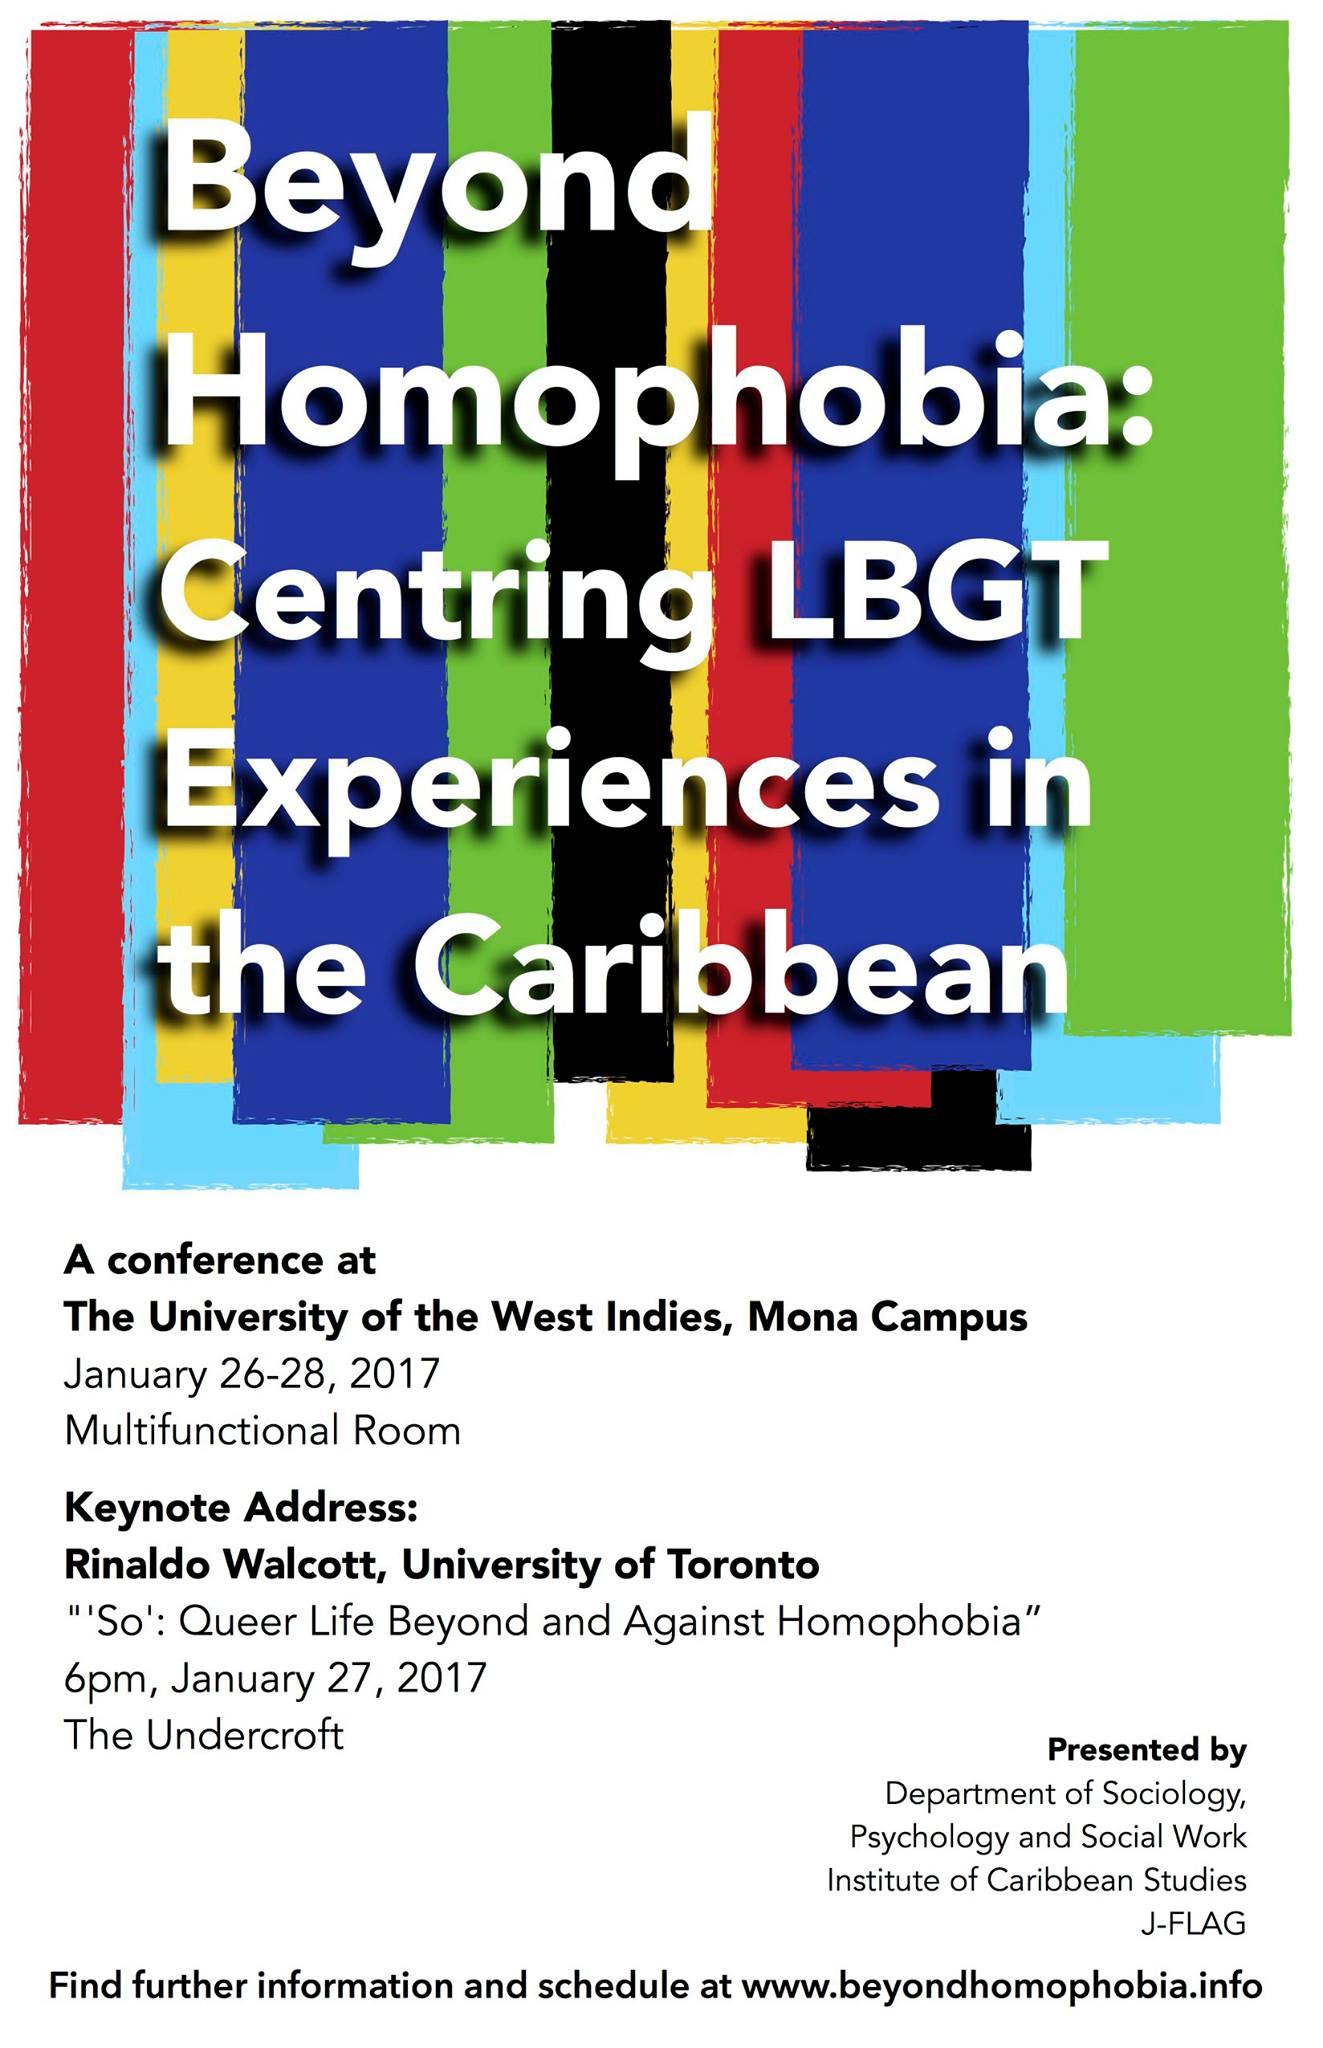 Beyond Homophobia: Centring LGBT Experiences in the Caribbean